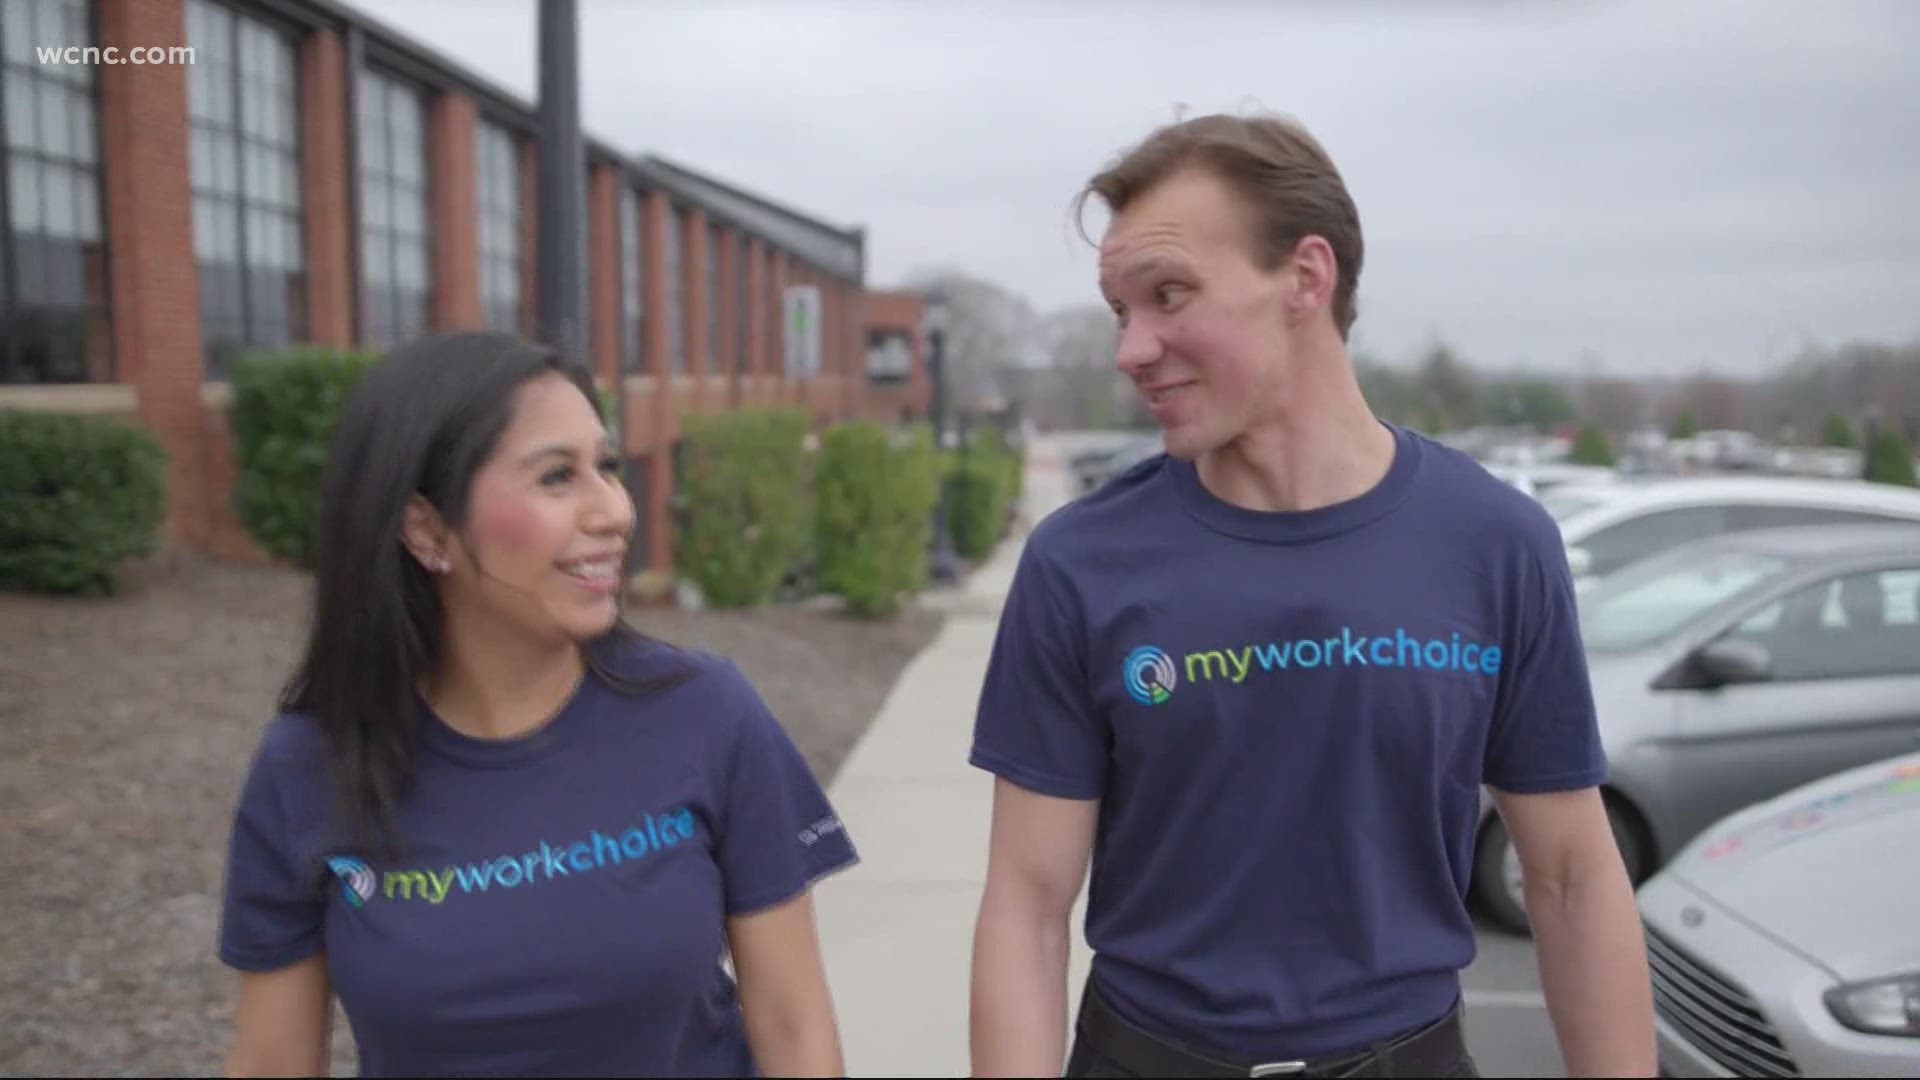 MyWorkChoice, is connecting people in 10 states with work quickly, a step in the right direction when it comes to getting people back on their feet.